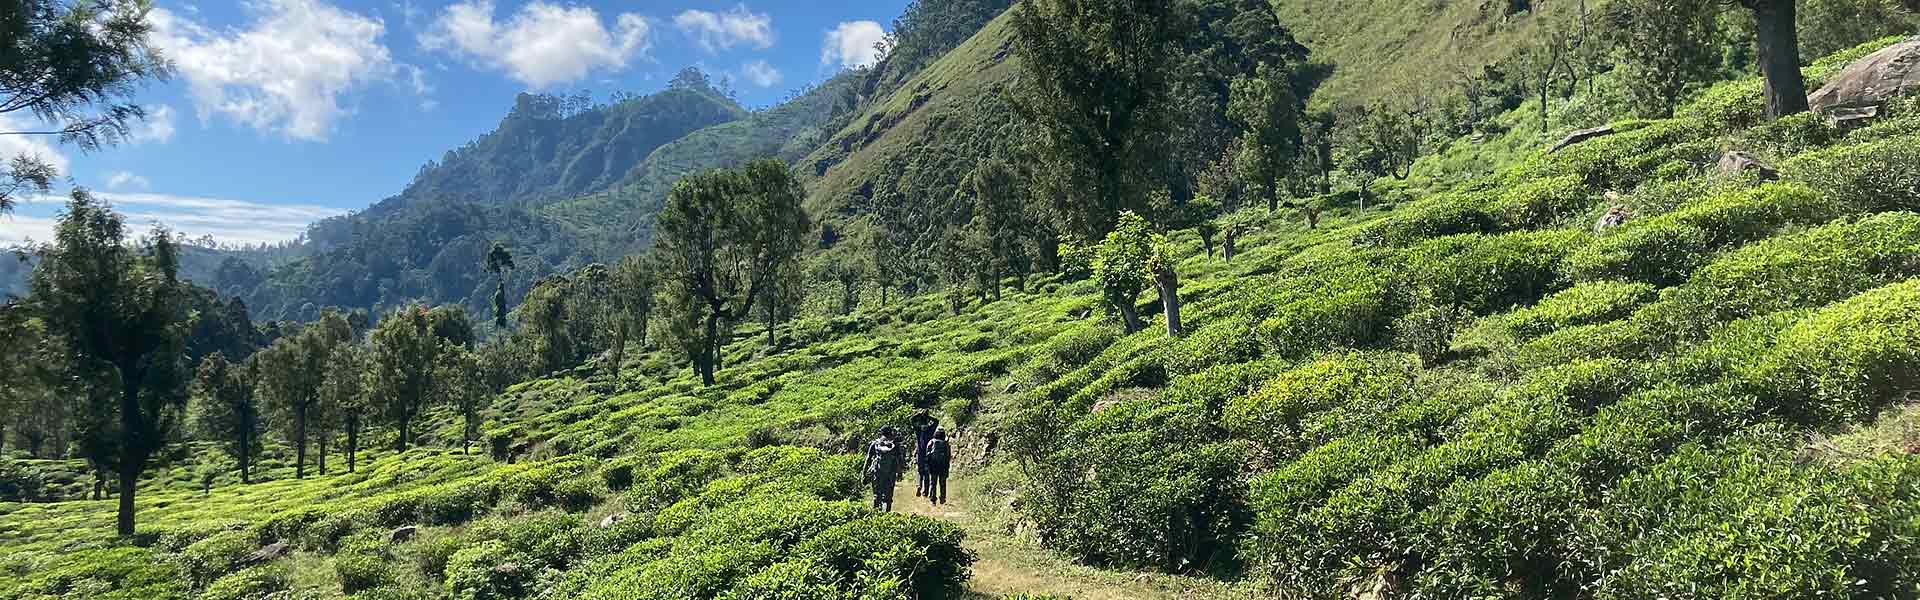 Lanka's central highlands with tea plantation and a winding path leading into the hiking trail